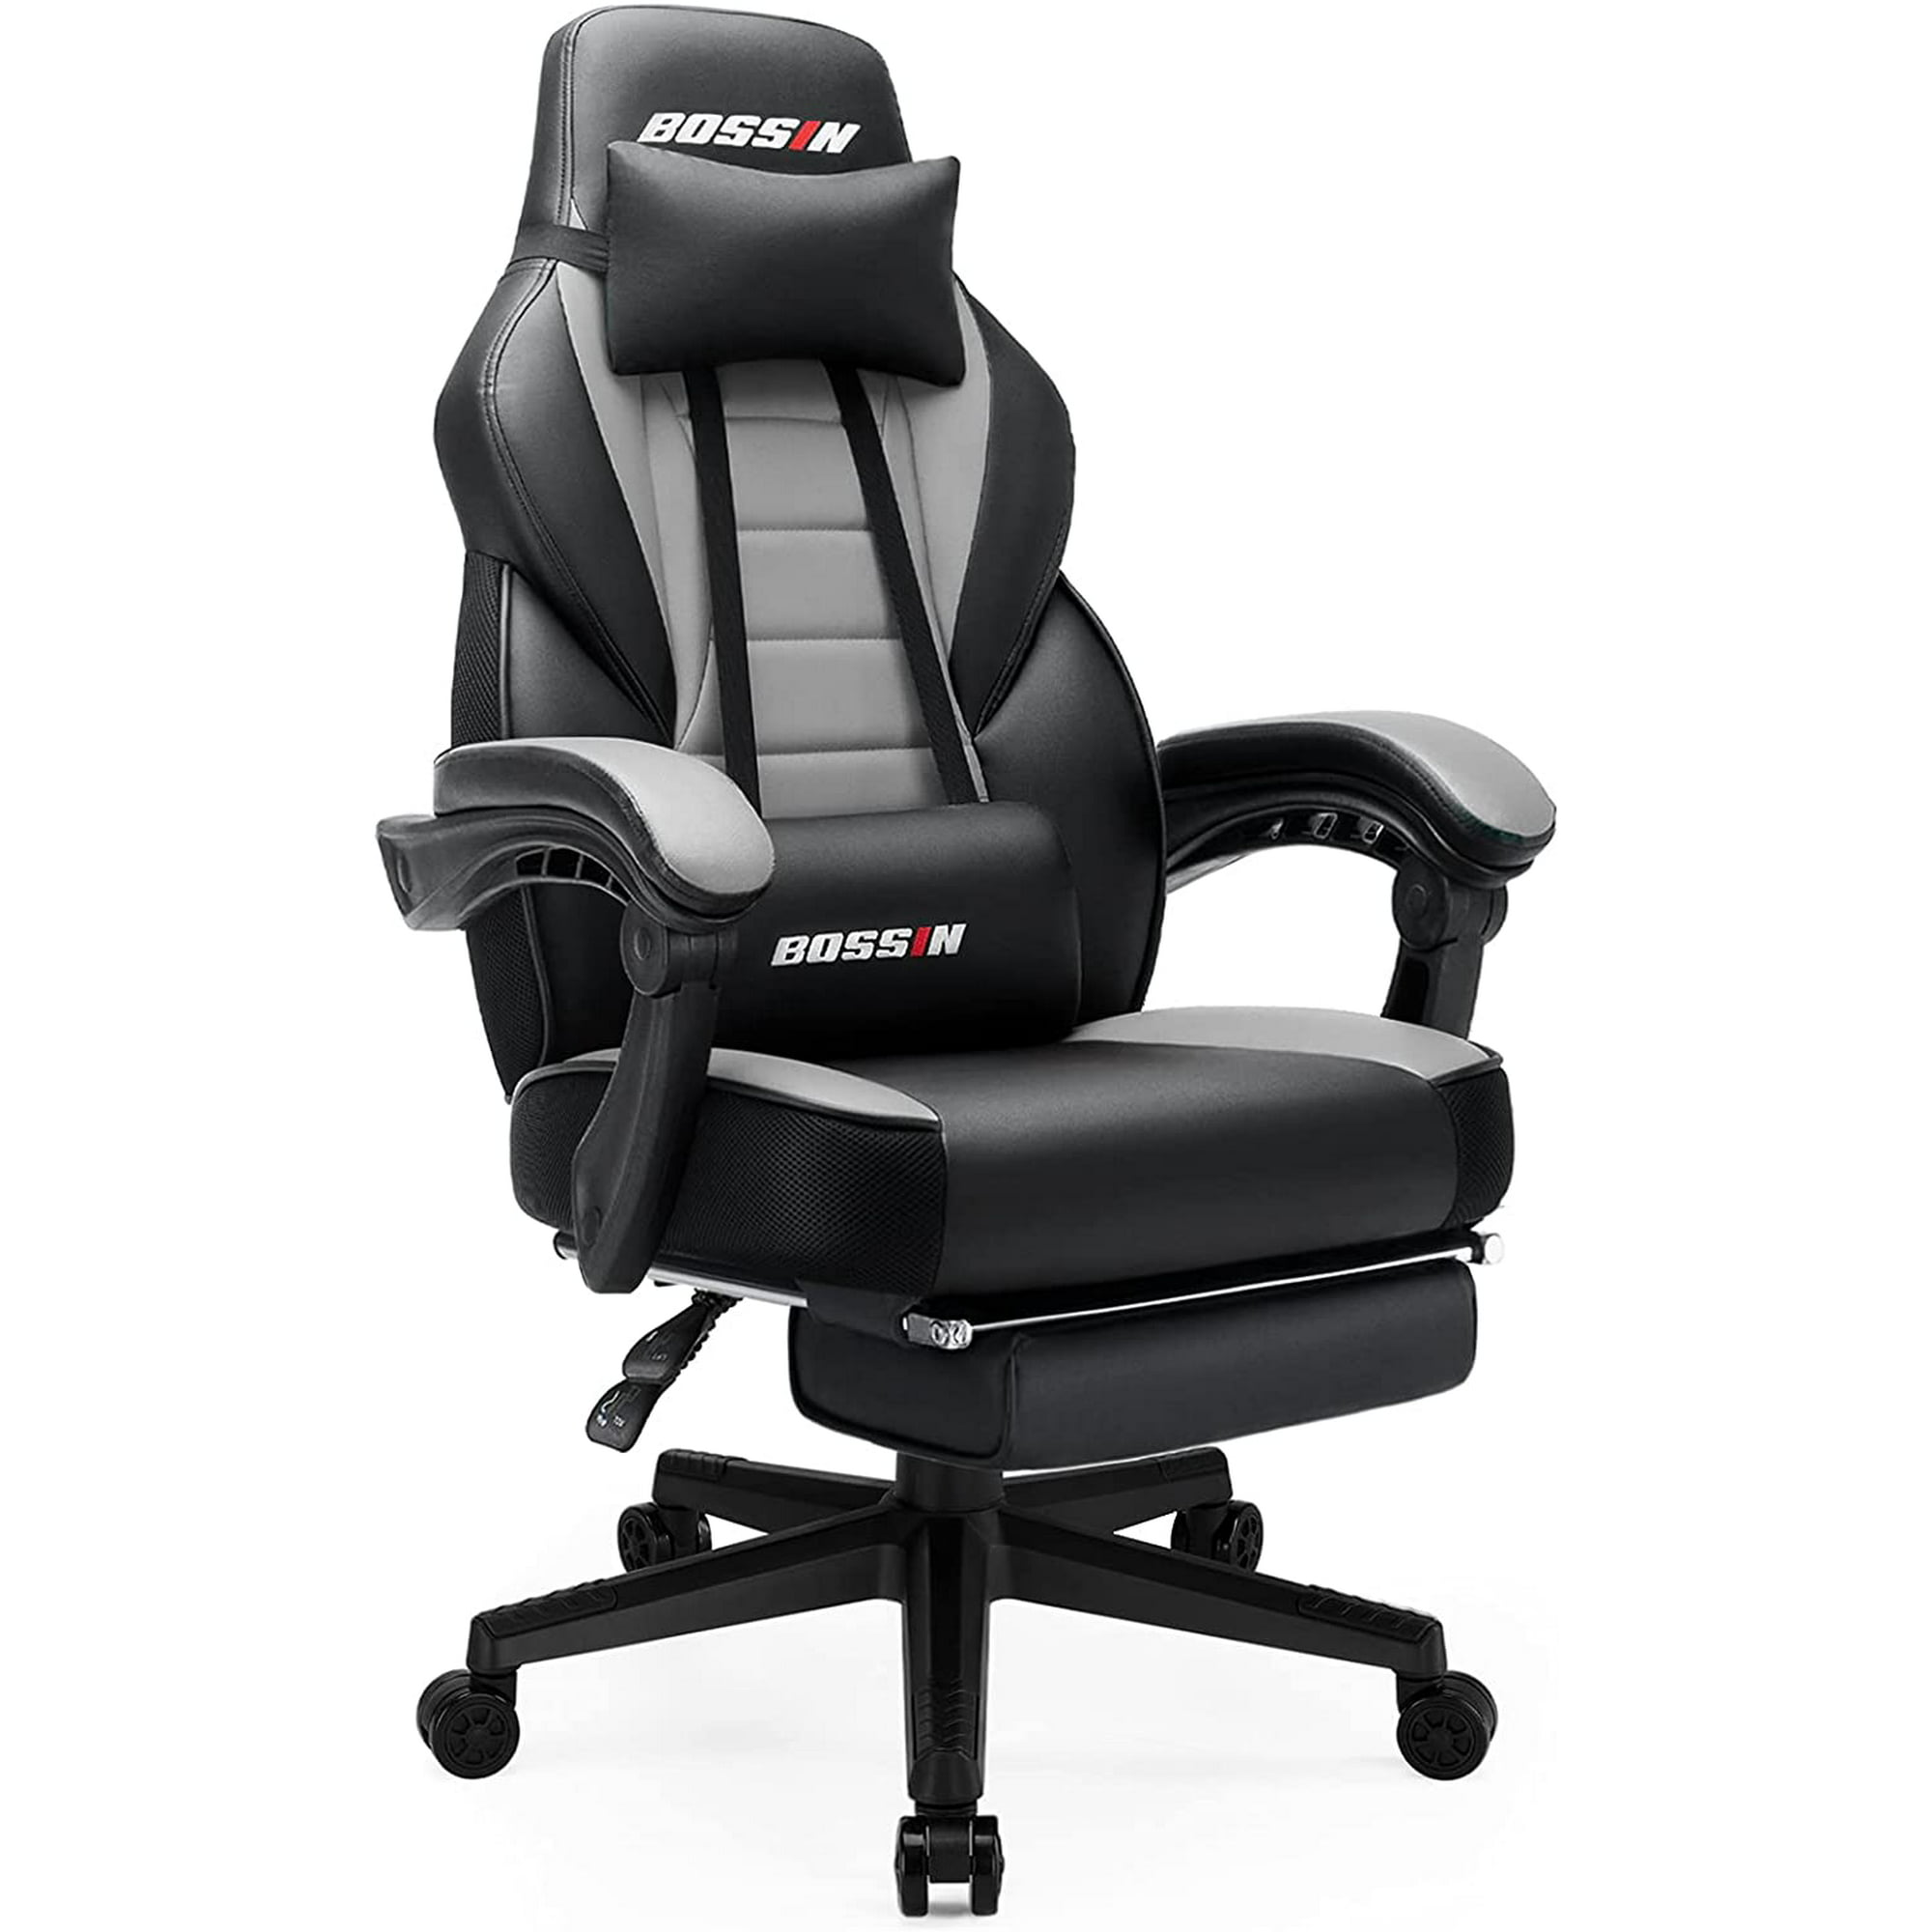 Bossin Leather Tall Gaming Chair with Footrest, Headrest and Lumbar Support